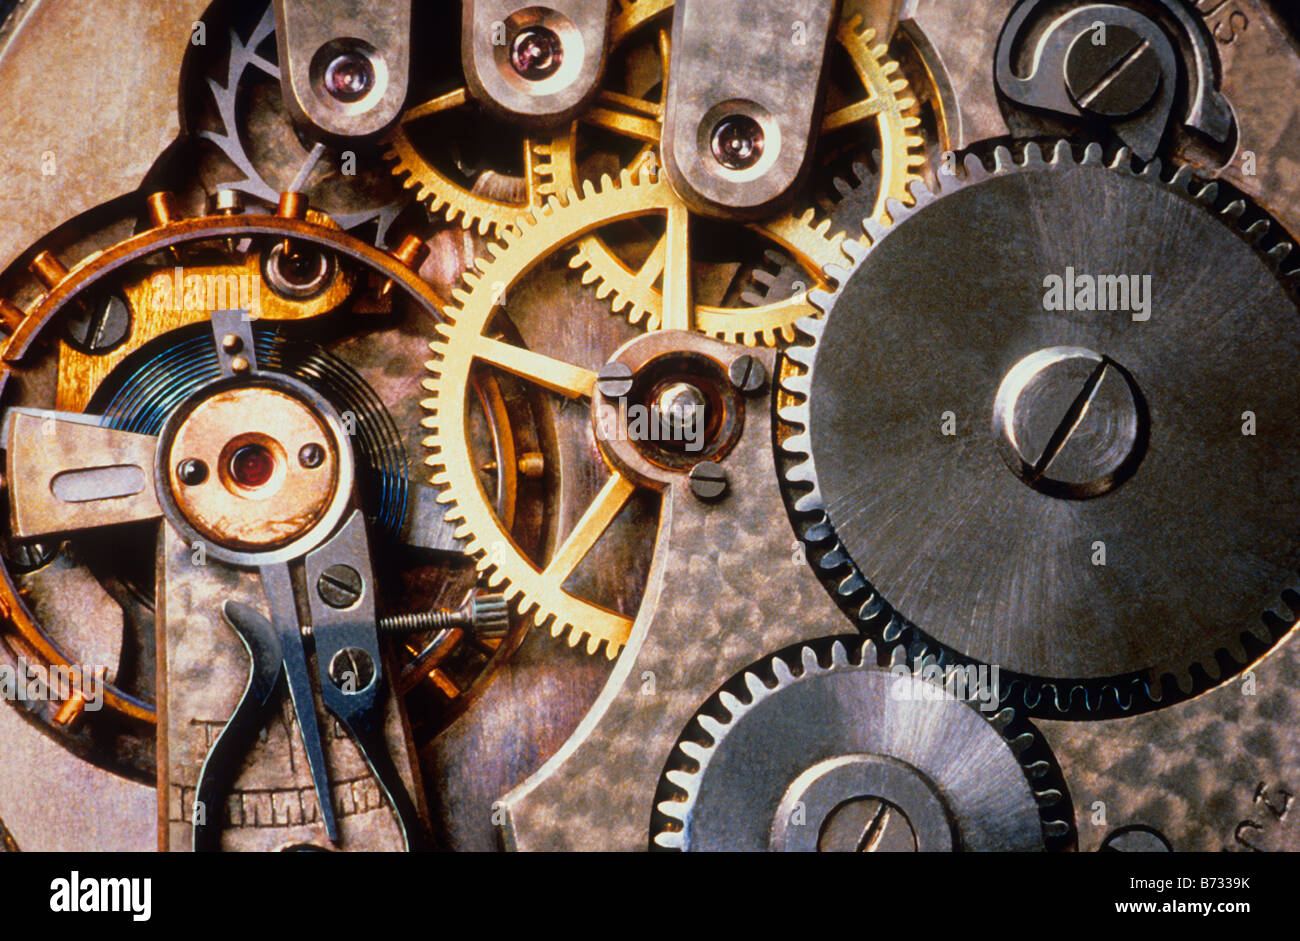 Gears. Clock mechanical gears close up. Interior of watch mechanism. Timepiece and interlocking circular cogs. Time Stock Photo